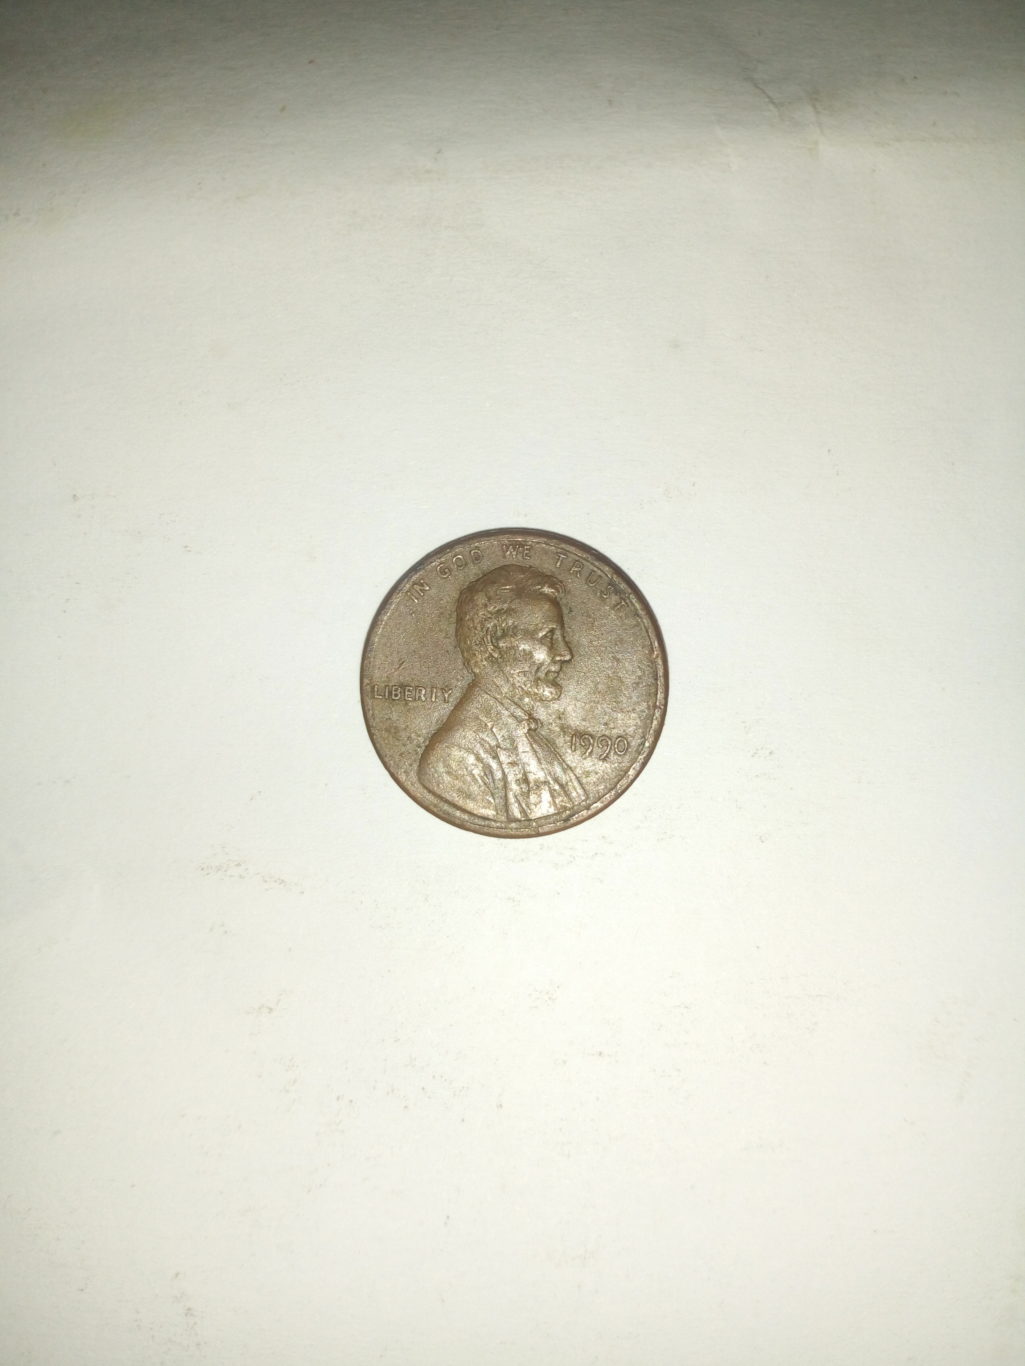 1990_ united states of America 1 cent